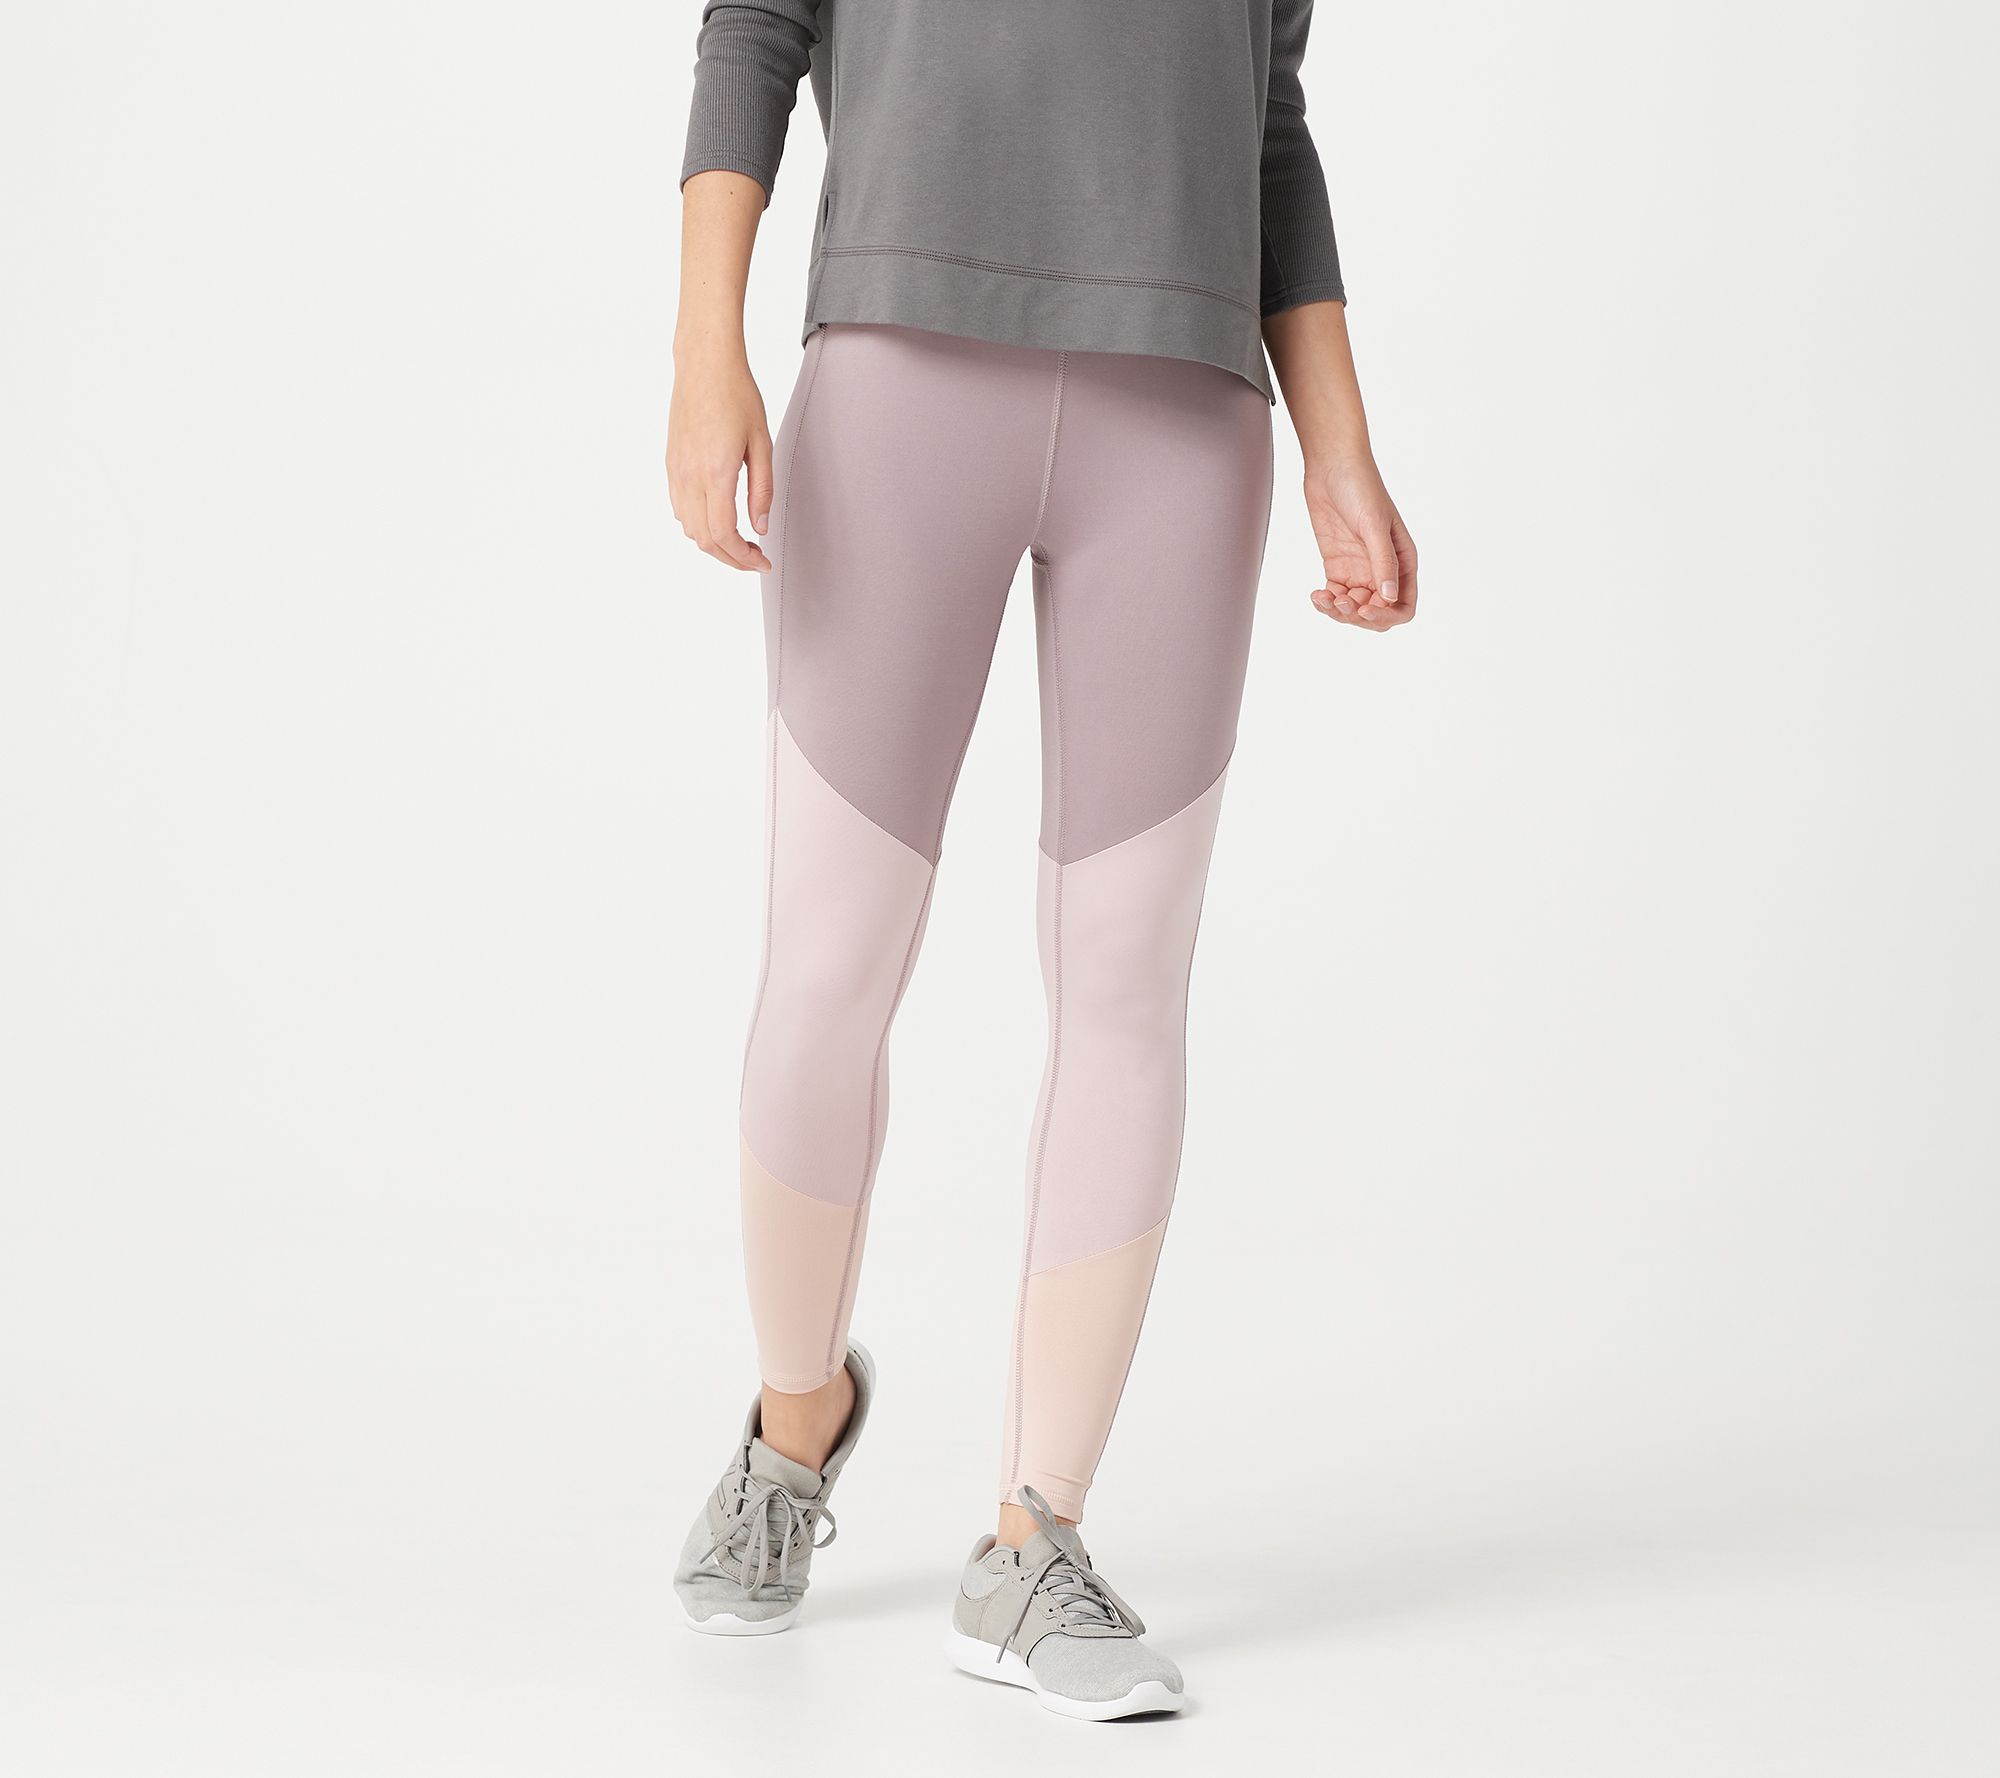 Rise 7/8 Pocket Leggings - Tracy Anderson